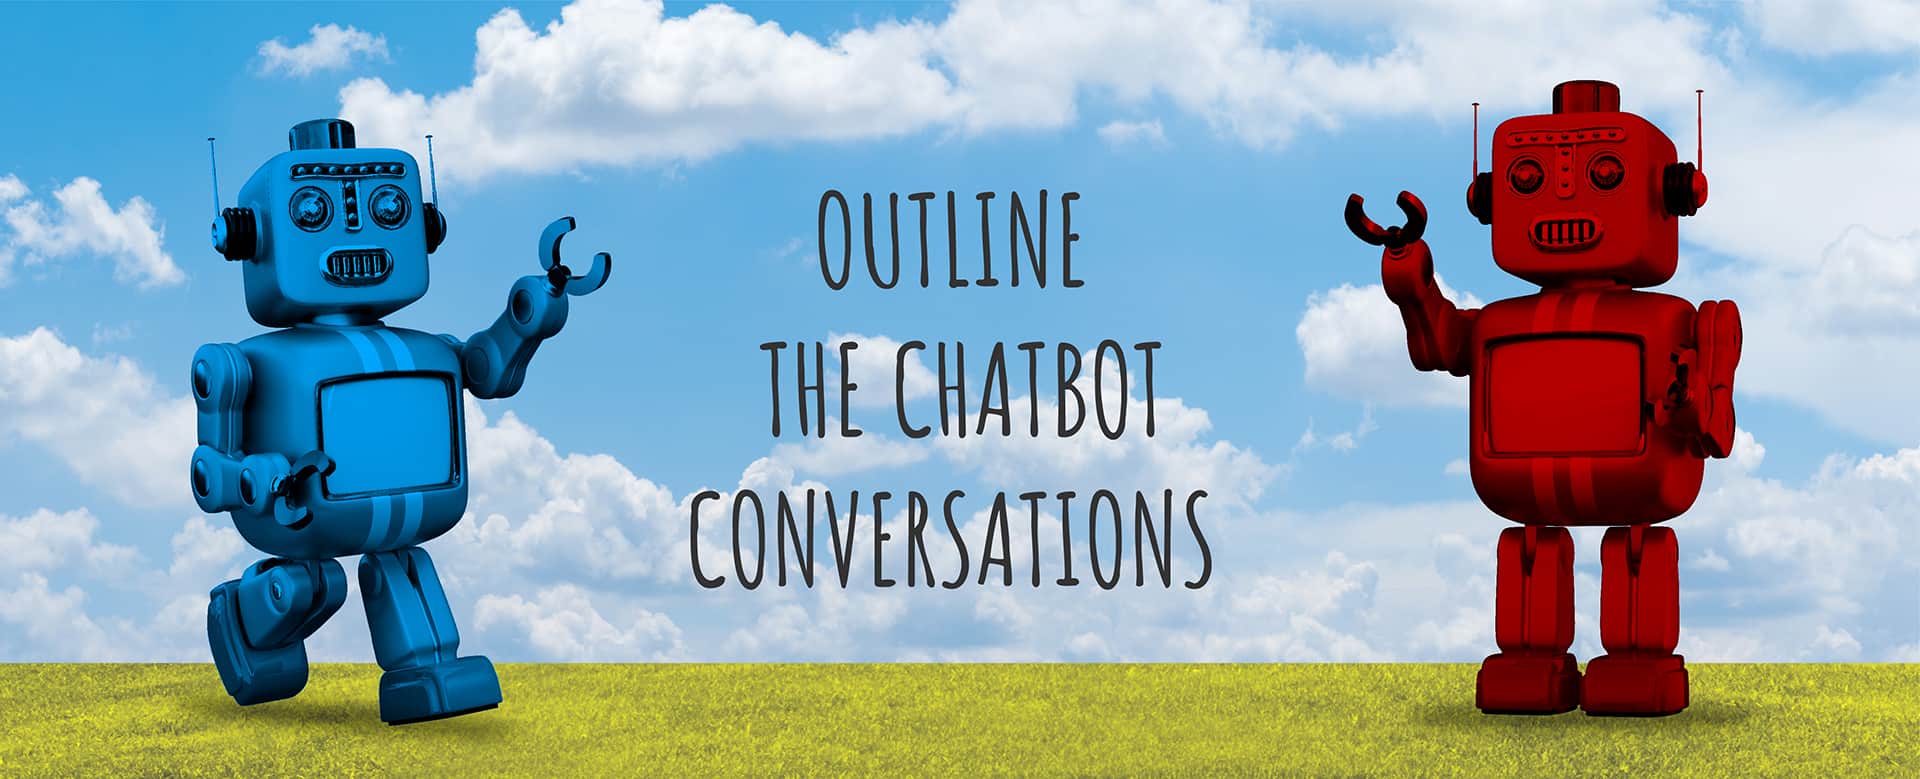 Outline the Chatbot Conversations